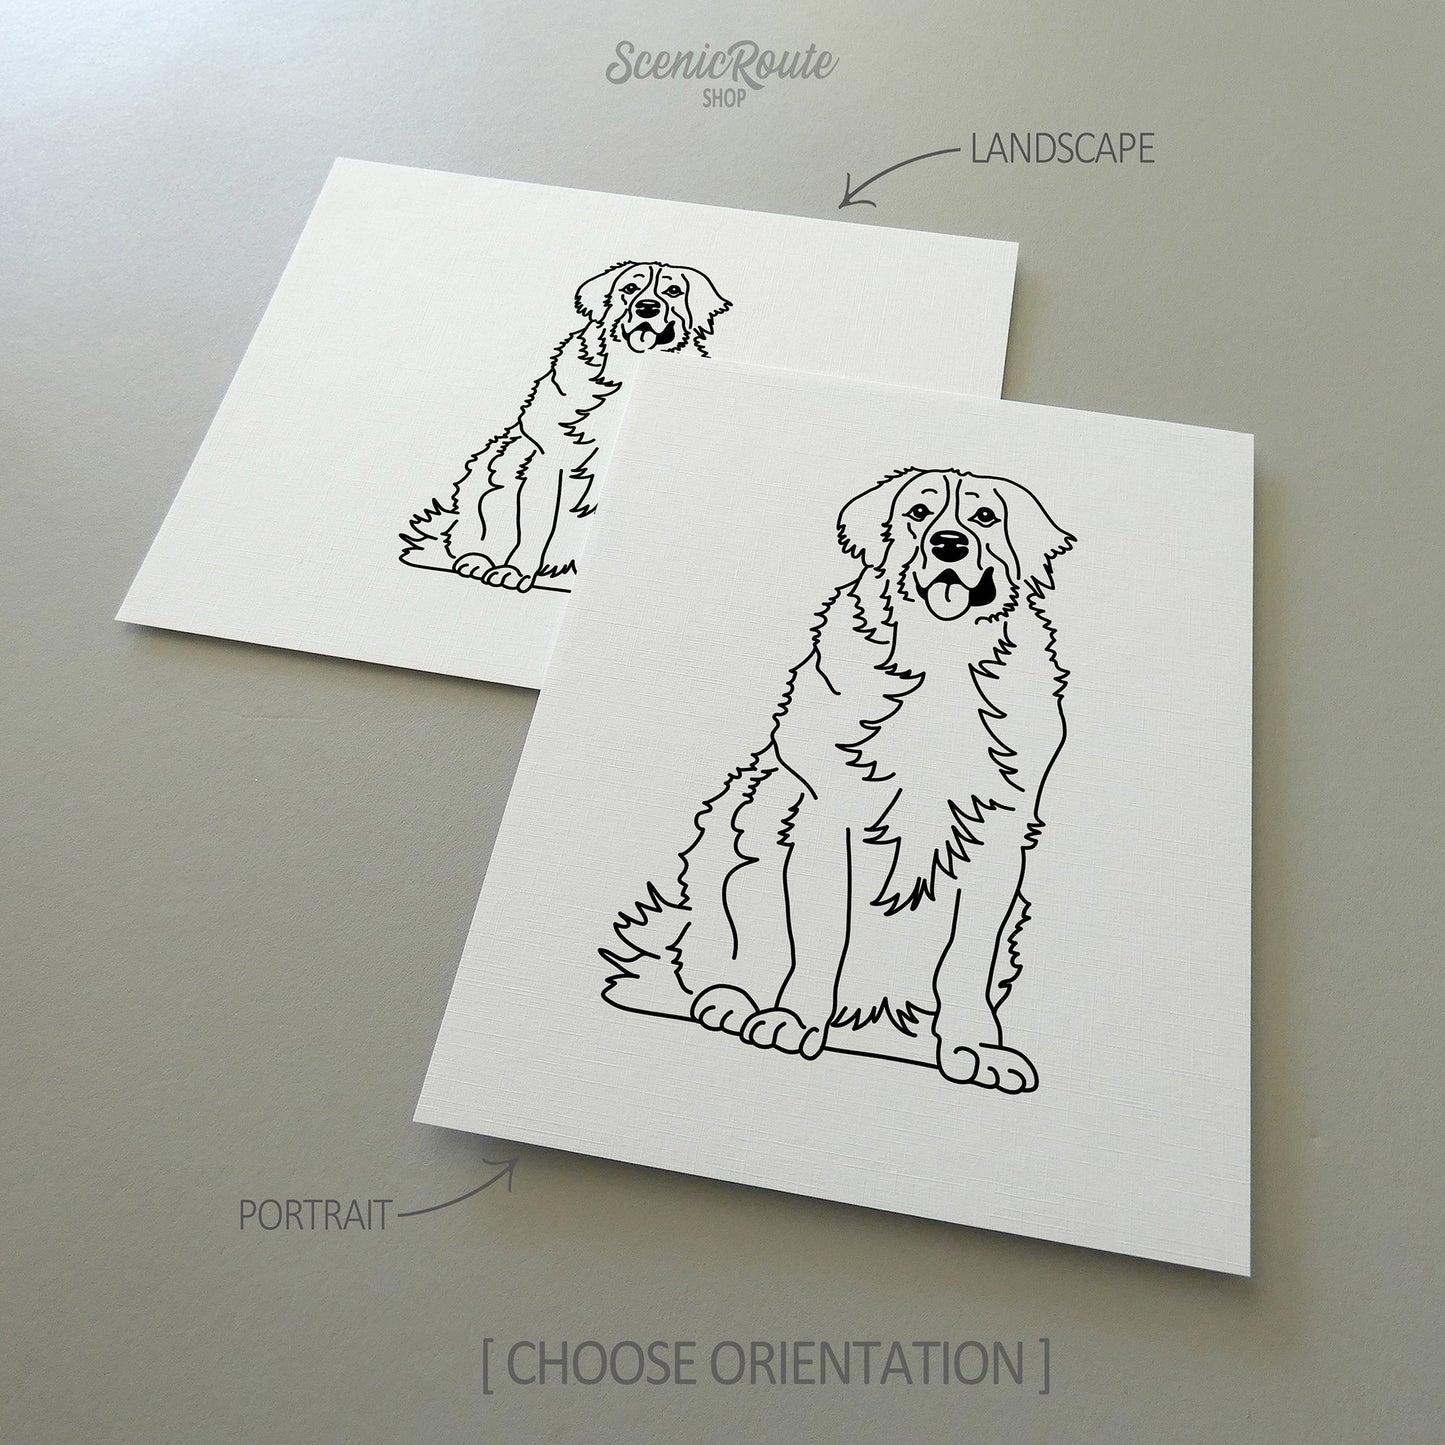 Two drawings of a Bernese Mountain Dog on white linen paper with a gray background.  Pieces are shown in portrait and landscape orientation options to illustrate the available art print options.